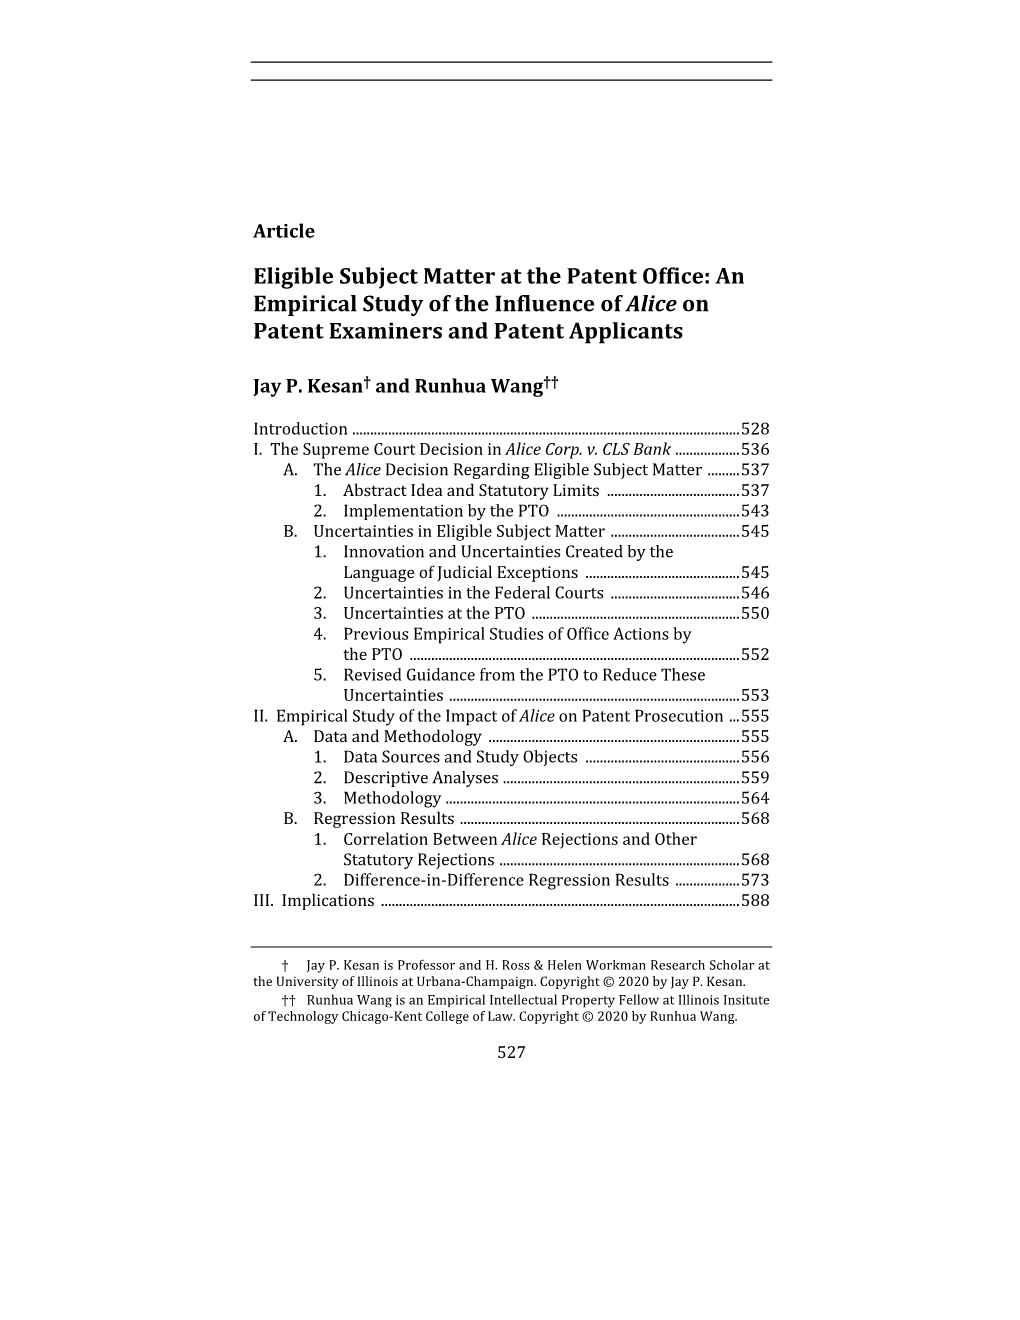 Eligible Subject Matter at the Patent Office: an Empirical Study of the Influence of Alice on Patent Examiners and Patent Applicants